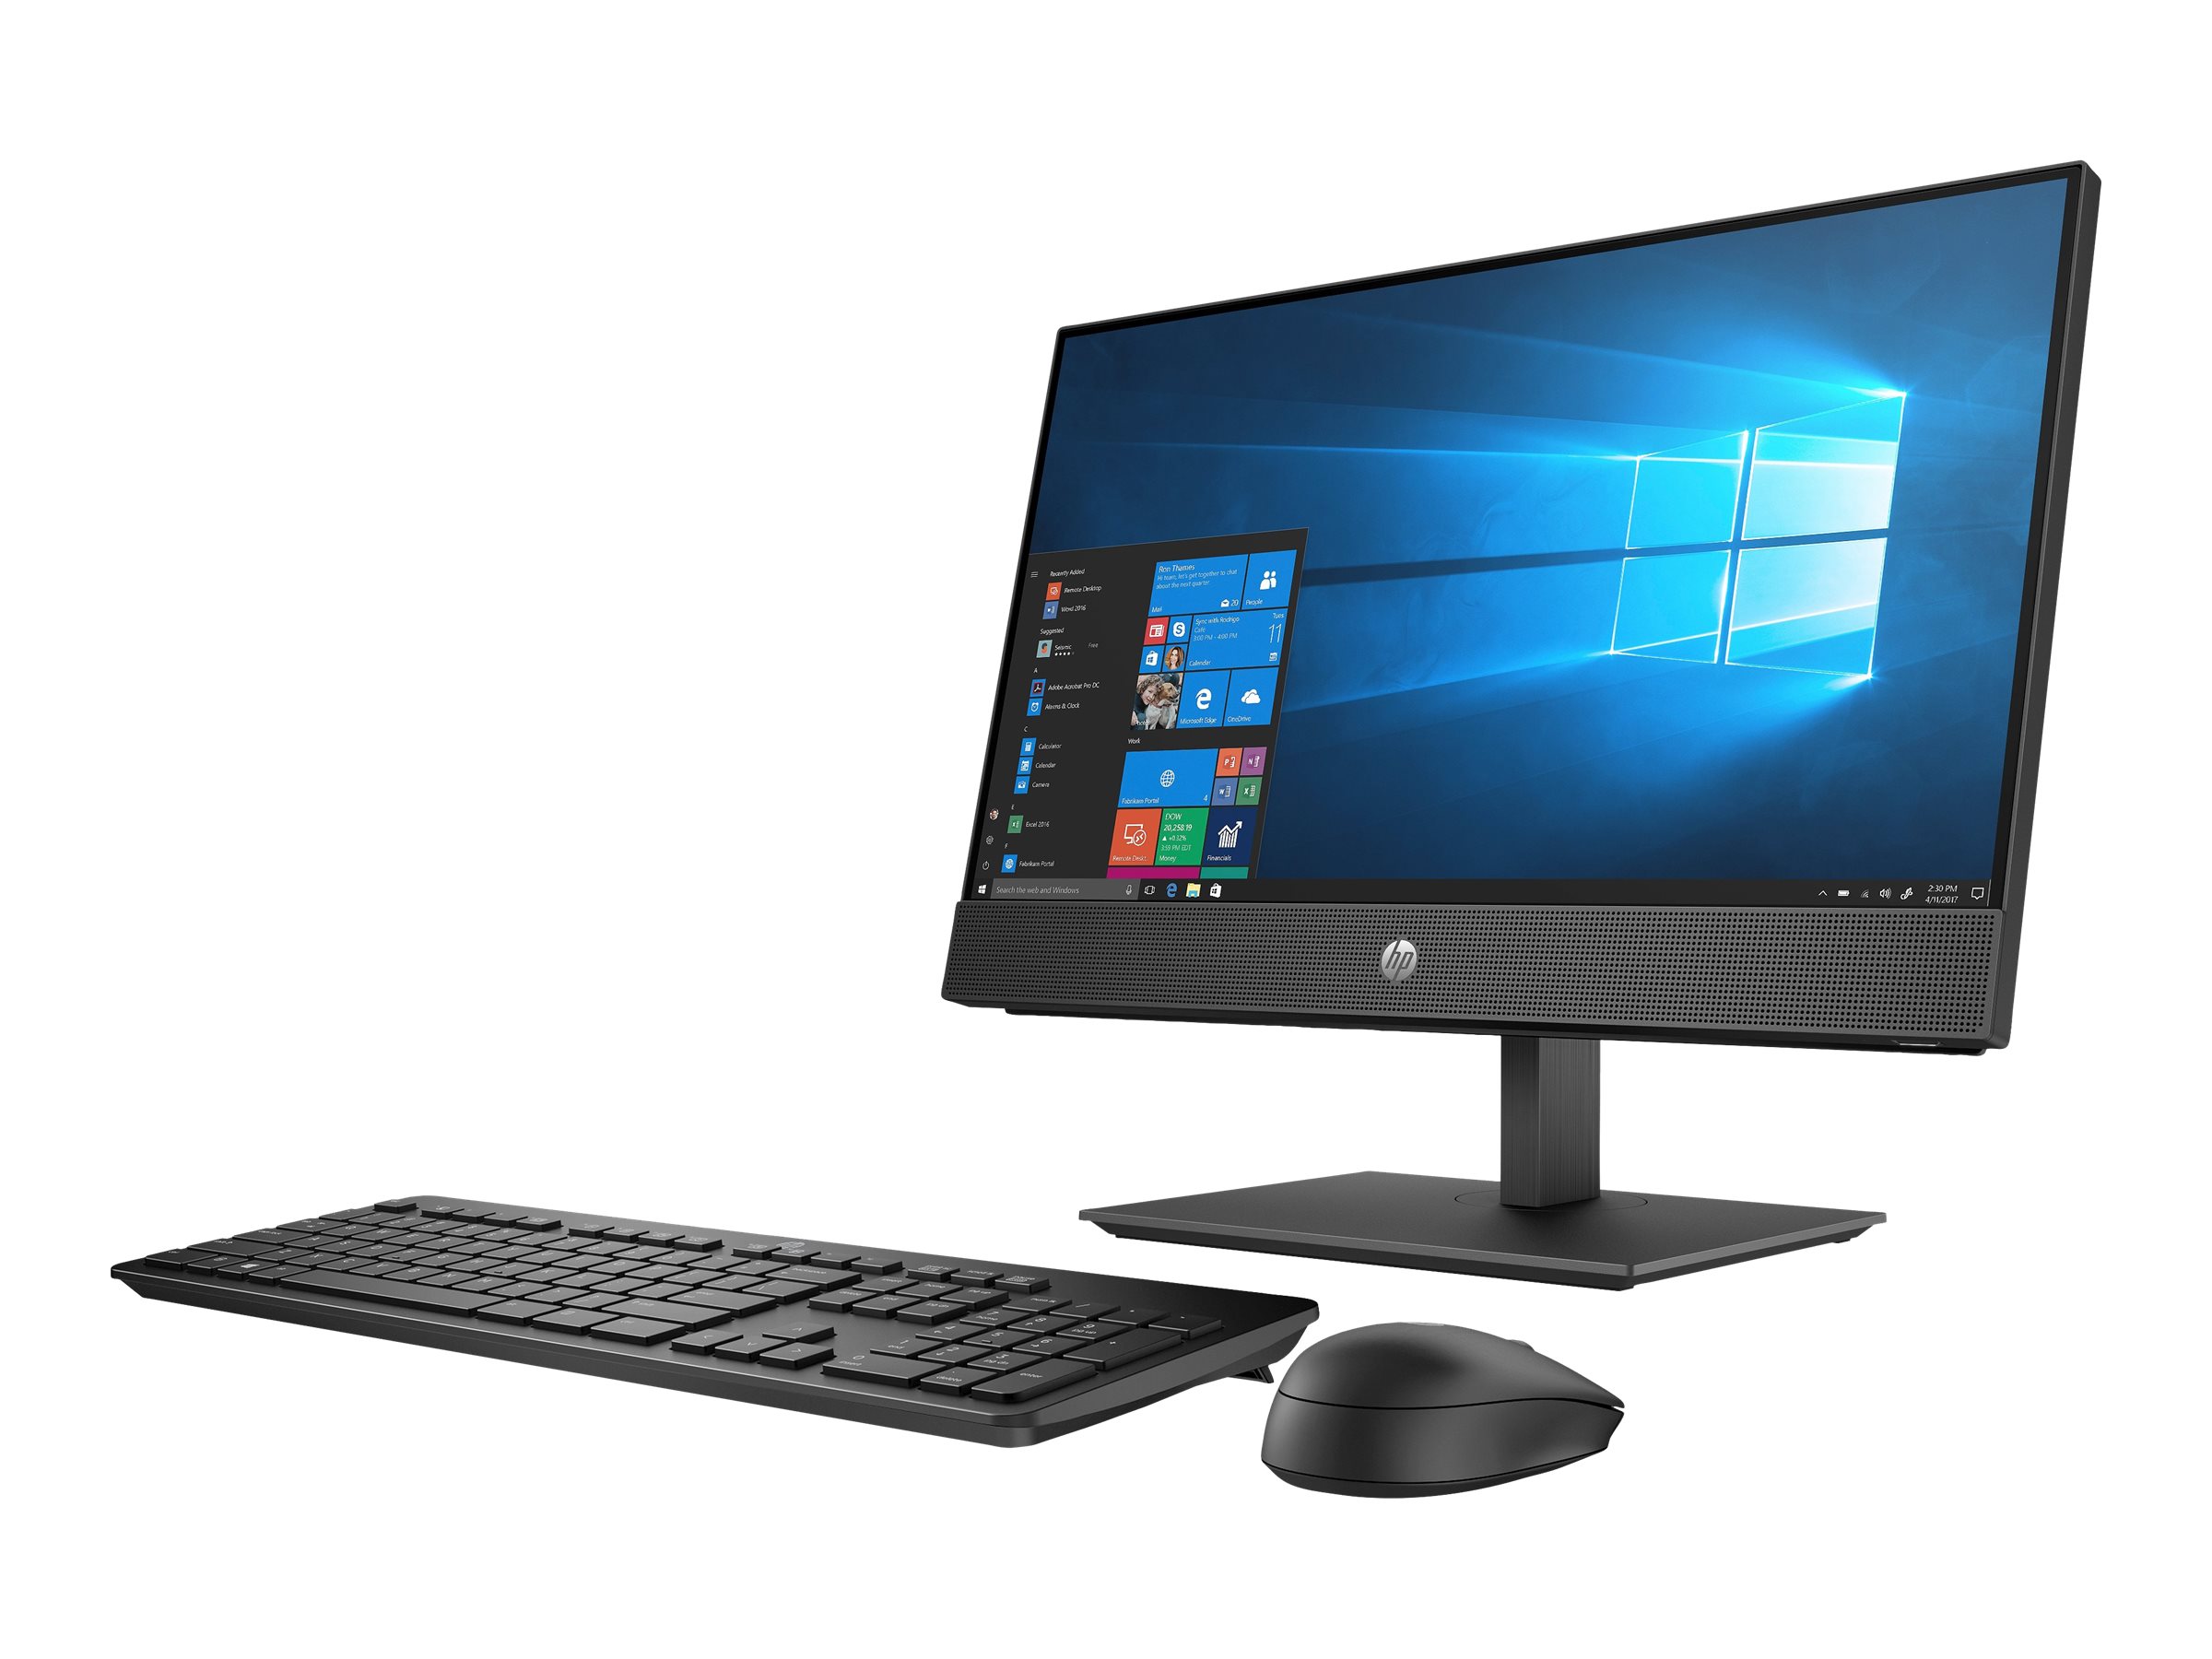 HP ProOne 600 G4 - All-in-one | www.shi.com